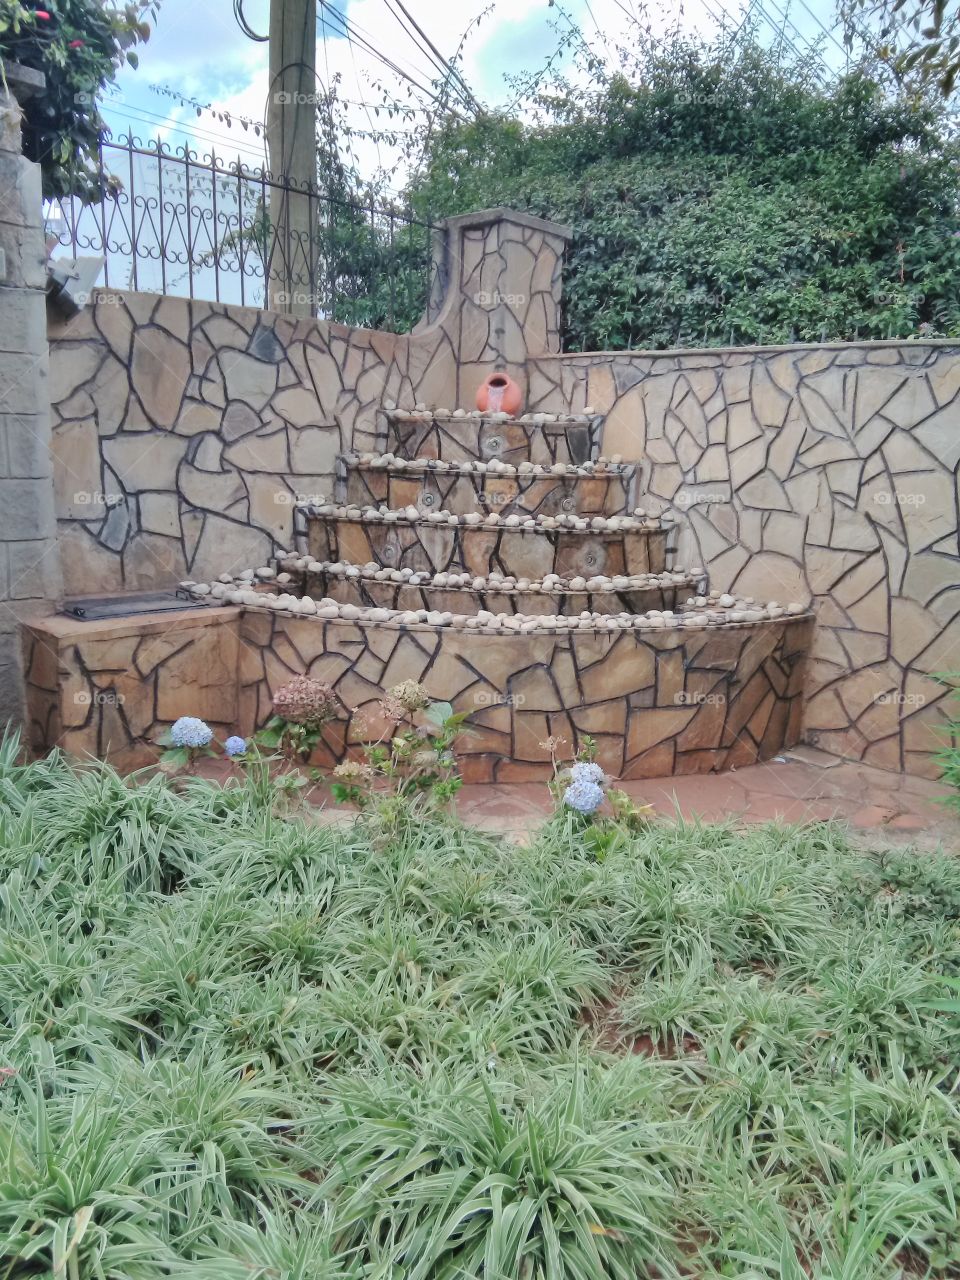 This is a beautiful modern fountain with pebbles on top. It has been build at a corner in a modern home compound.